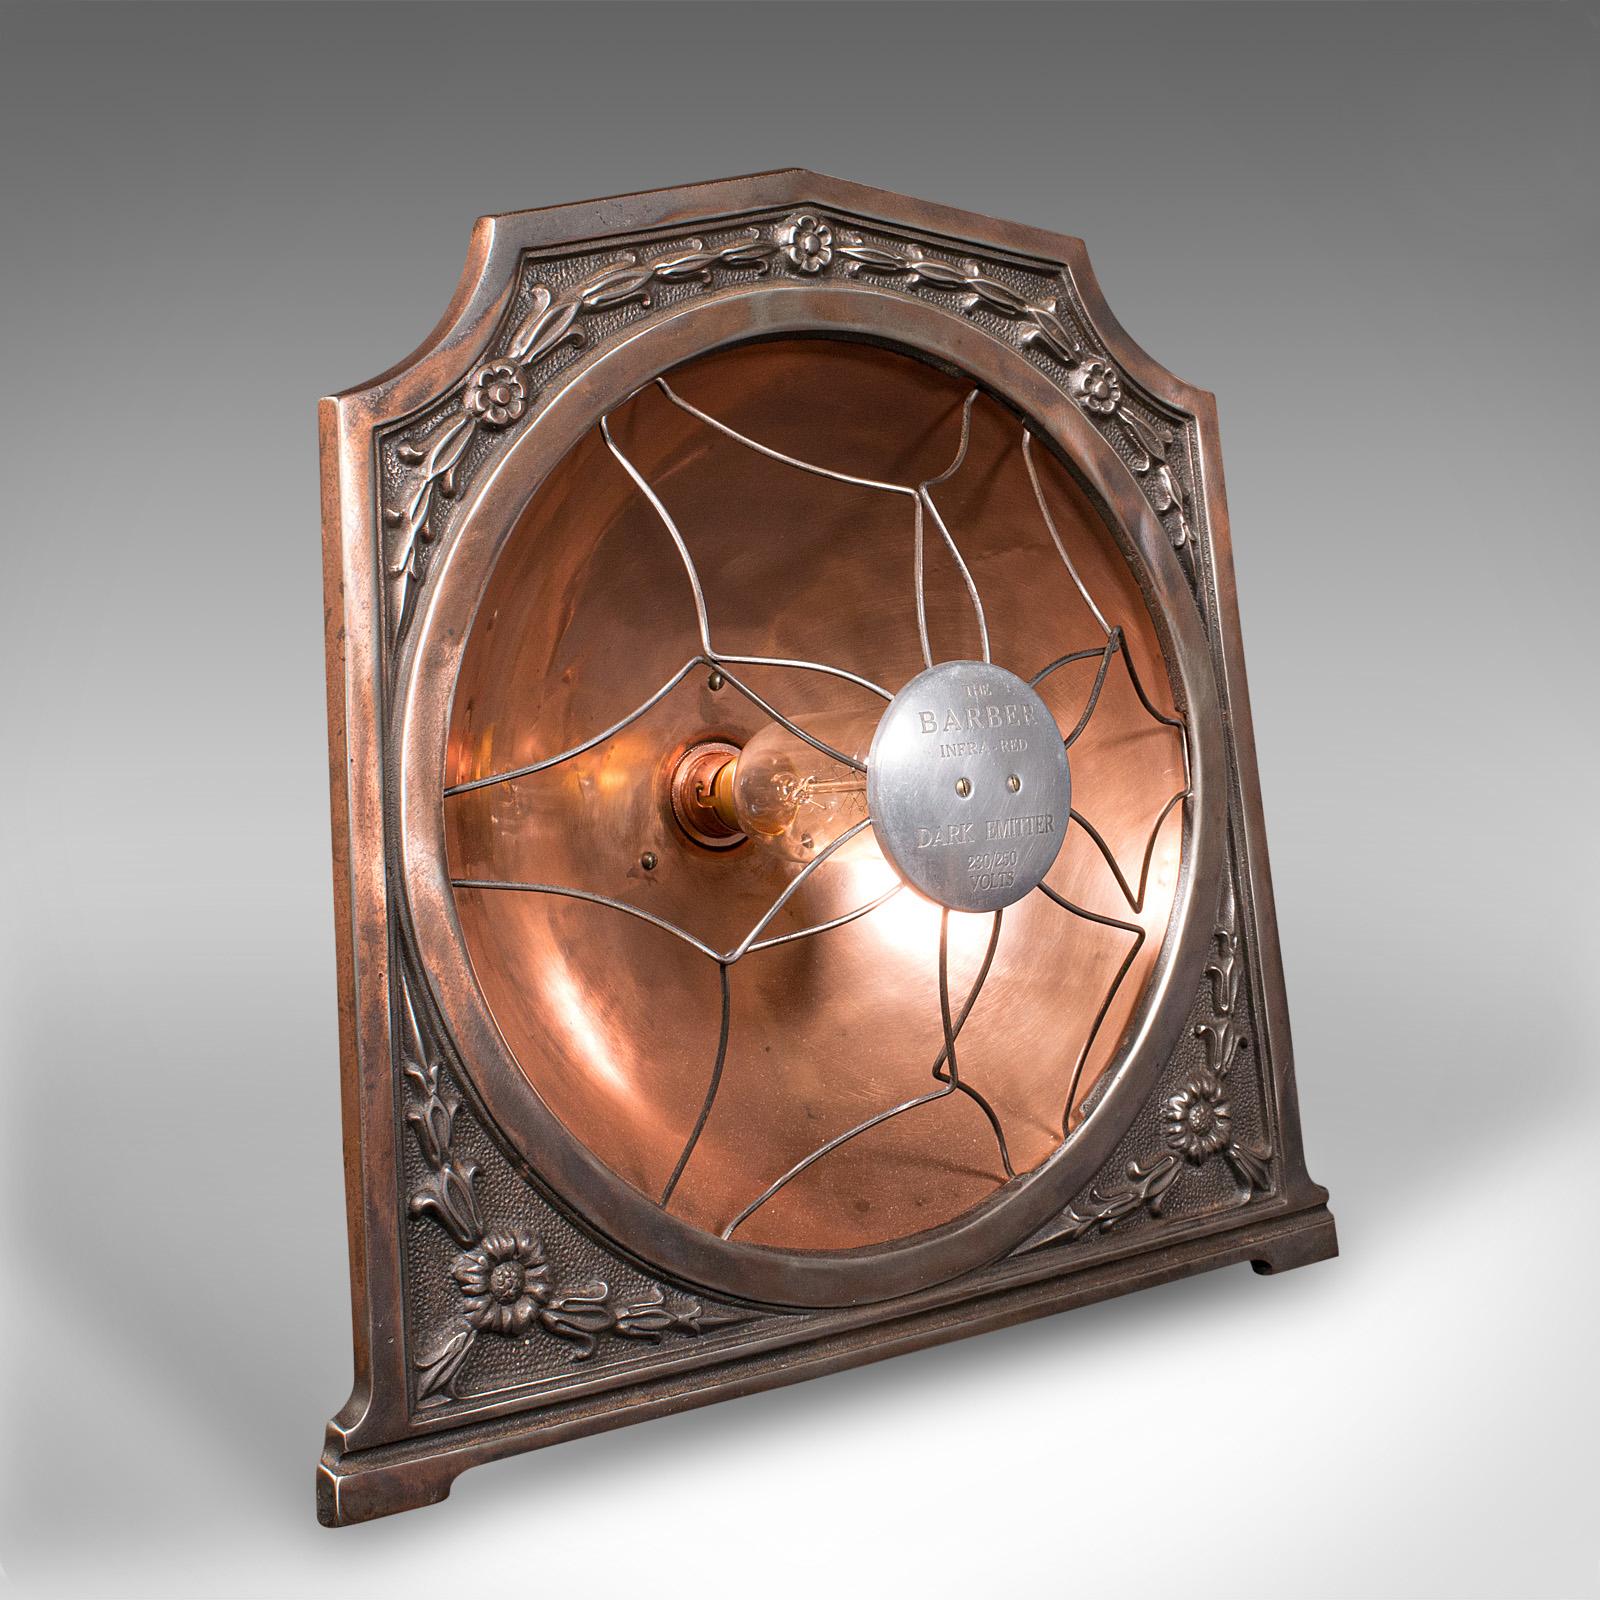 This is a vintage decorative accent lamp. An English, cast alloy and copper converted medical heat lamp, dating to the early 20th century, circa 1930.

Of fascinating form and decorative appeal, with a delightful finish
Displays a desirable aged